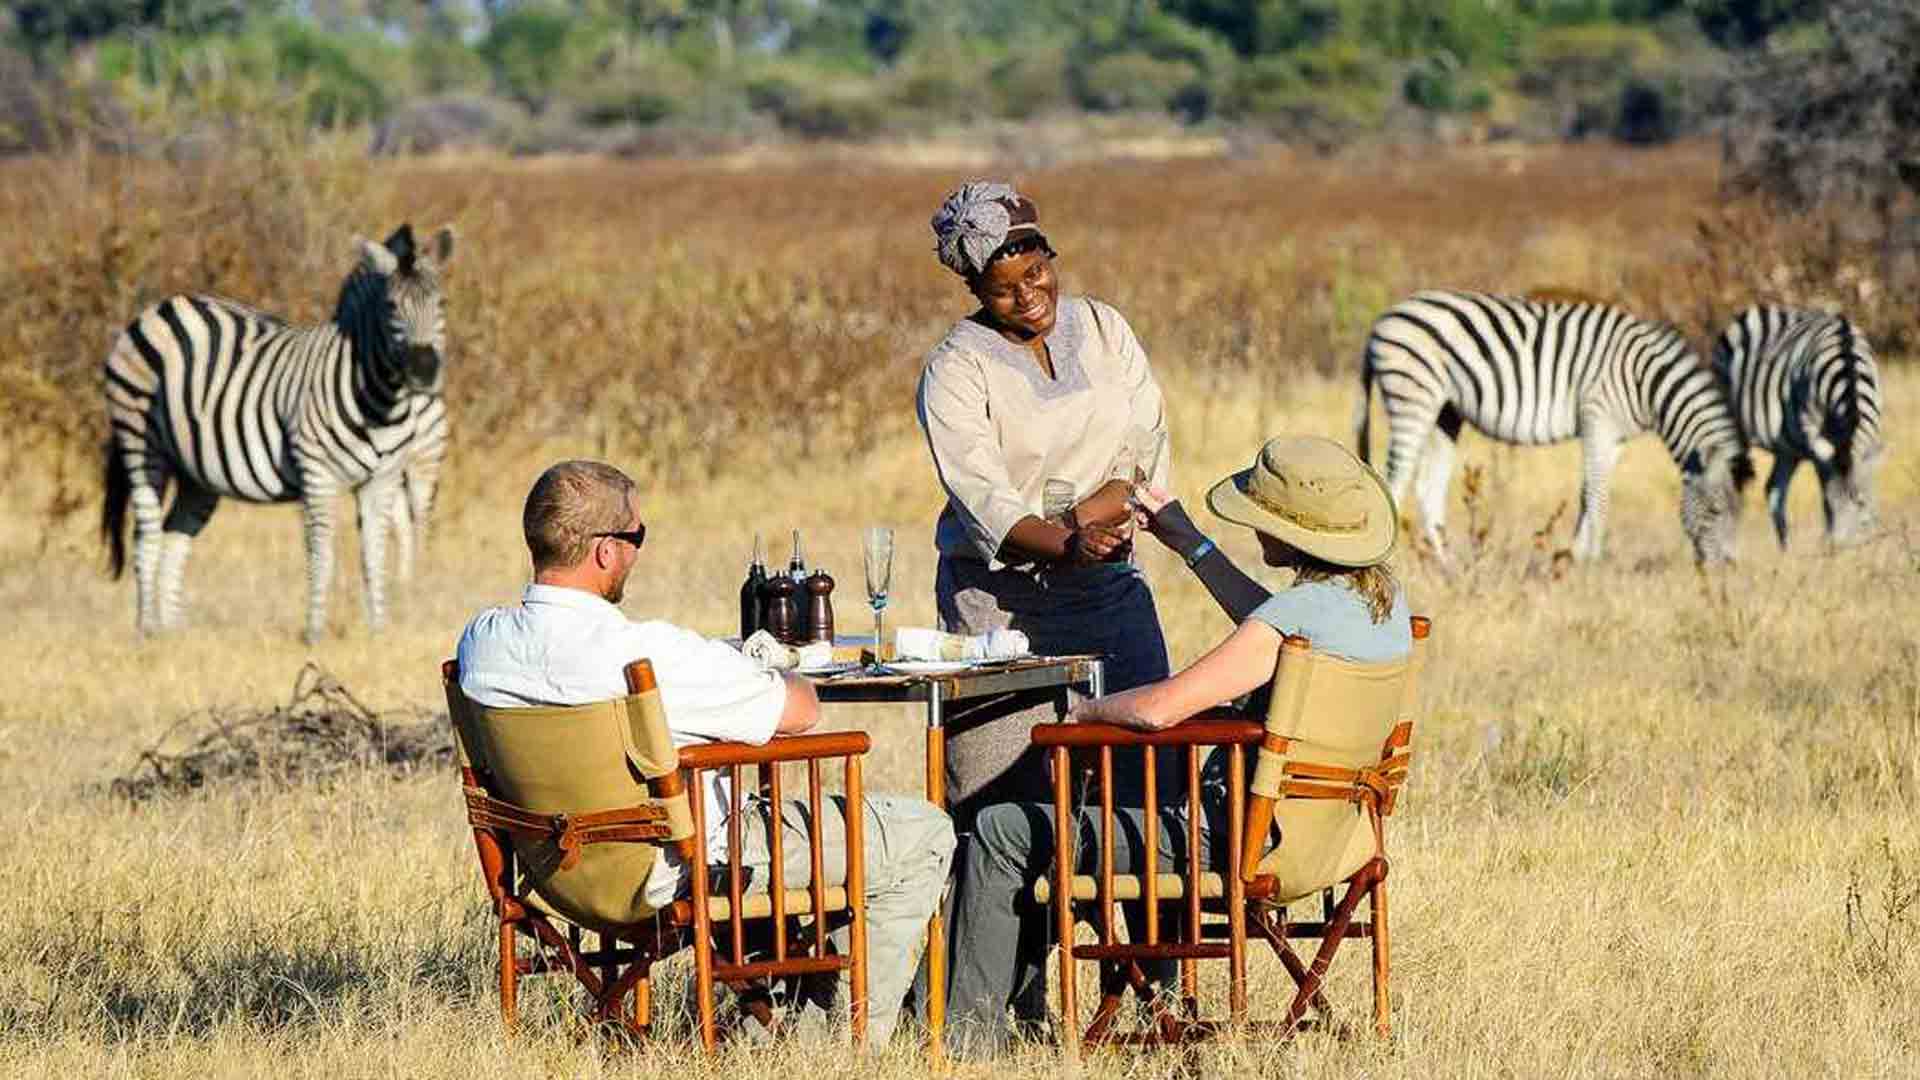 Northern Tanzania Safari is the most popular destination to visit in Africa